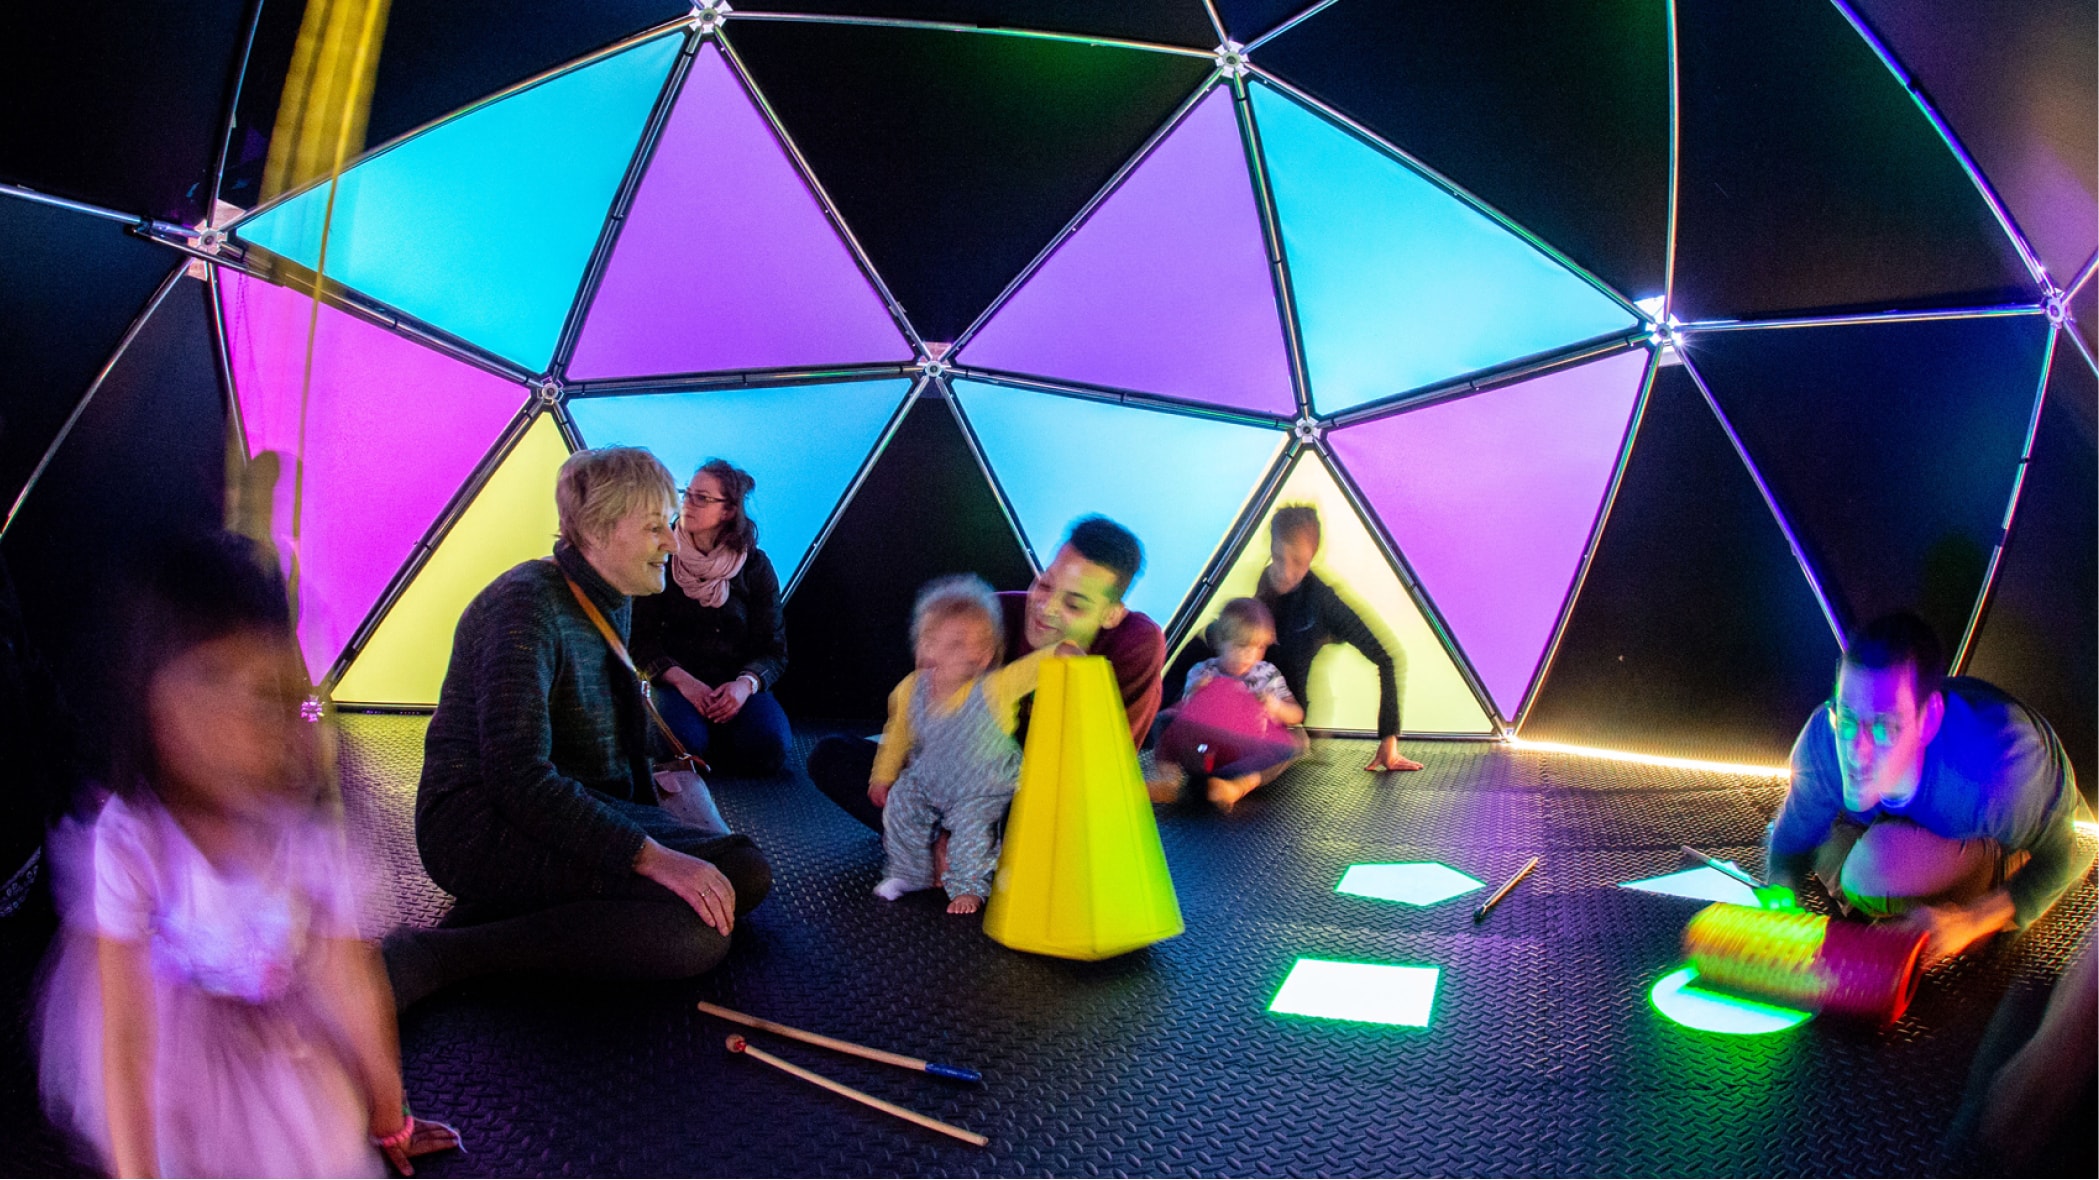 A group of children and adults play with instruments in a brightly lit and colourful geometric dome